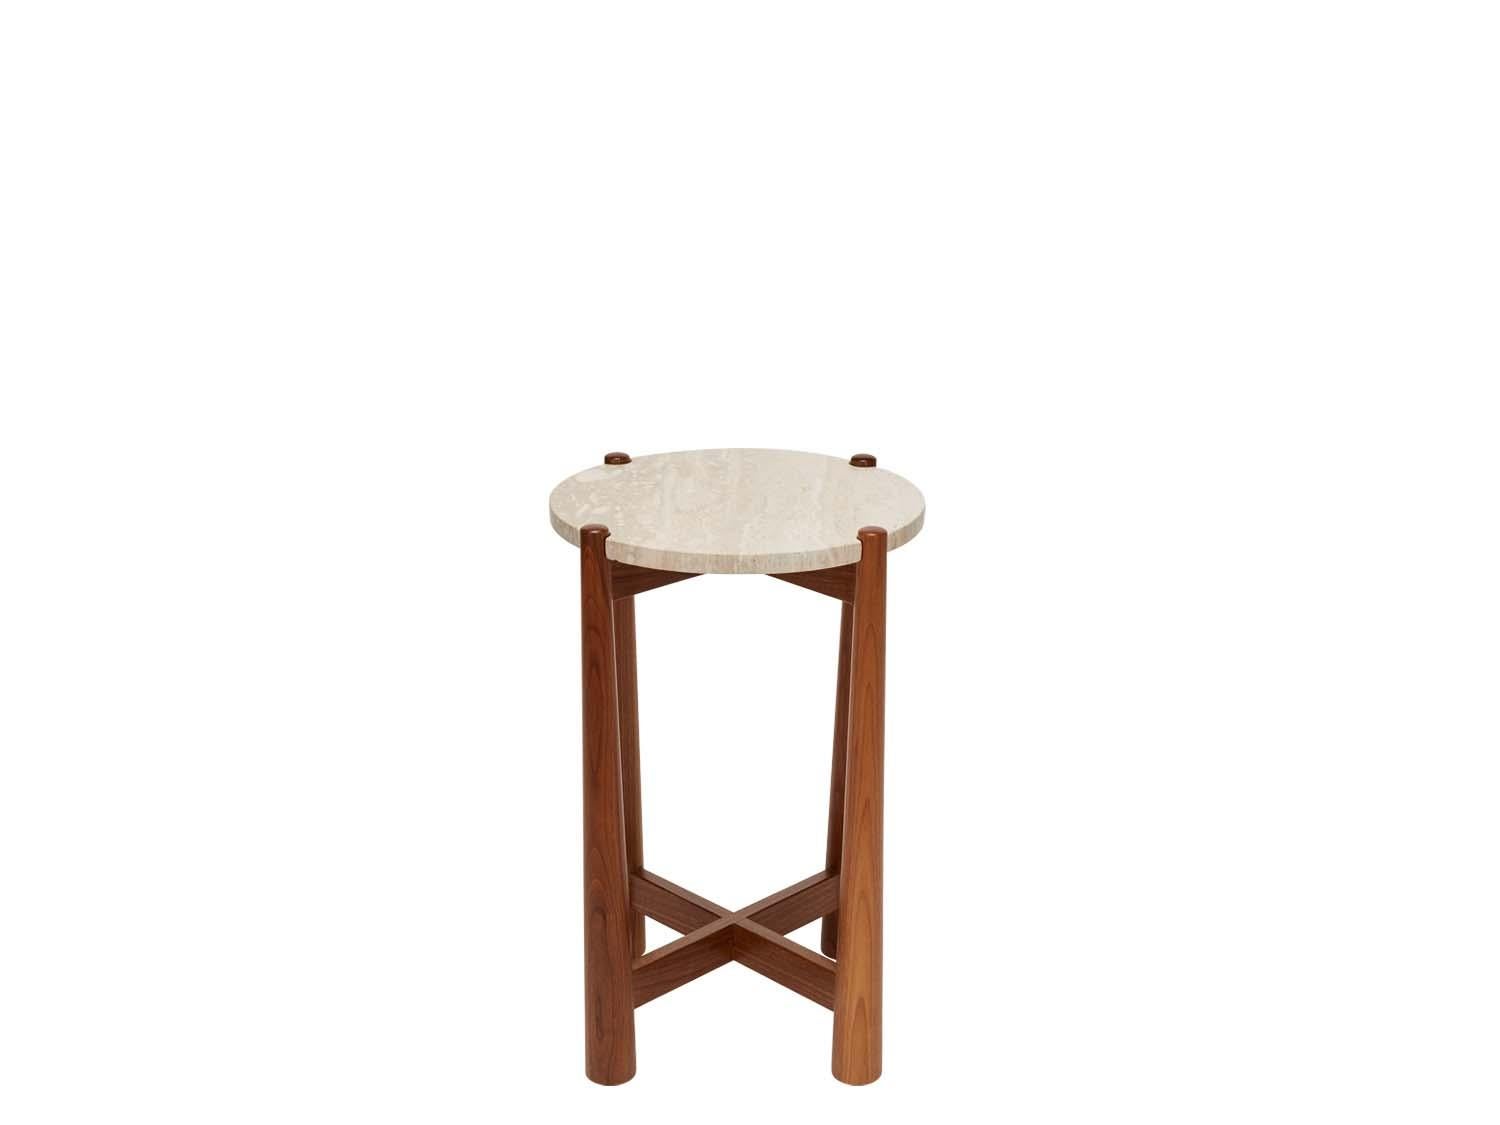 The Bronson drinks table features a round stone top with notched corners that rest atop a detailed walnut or oak base.

The Lawson-Fenning collection is designed and handmade in Los Angeles, California. Reach out to discover what options are